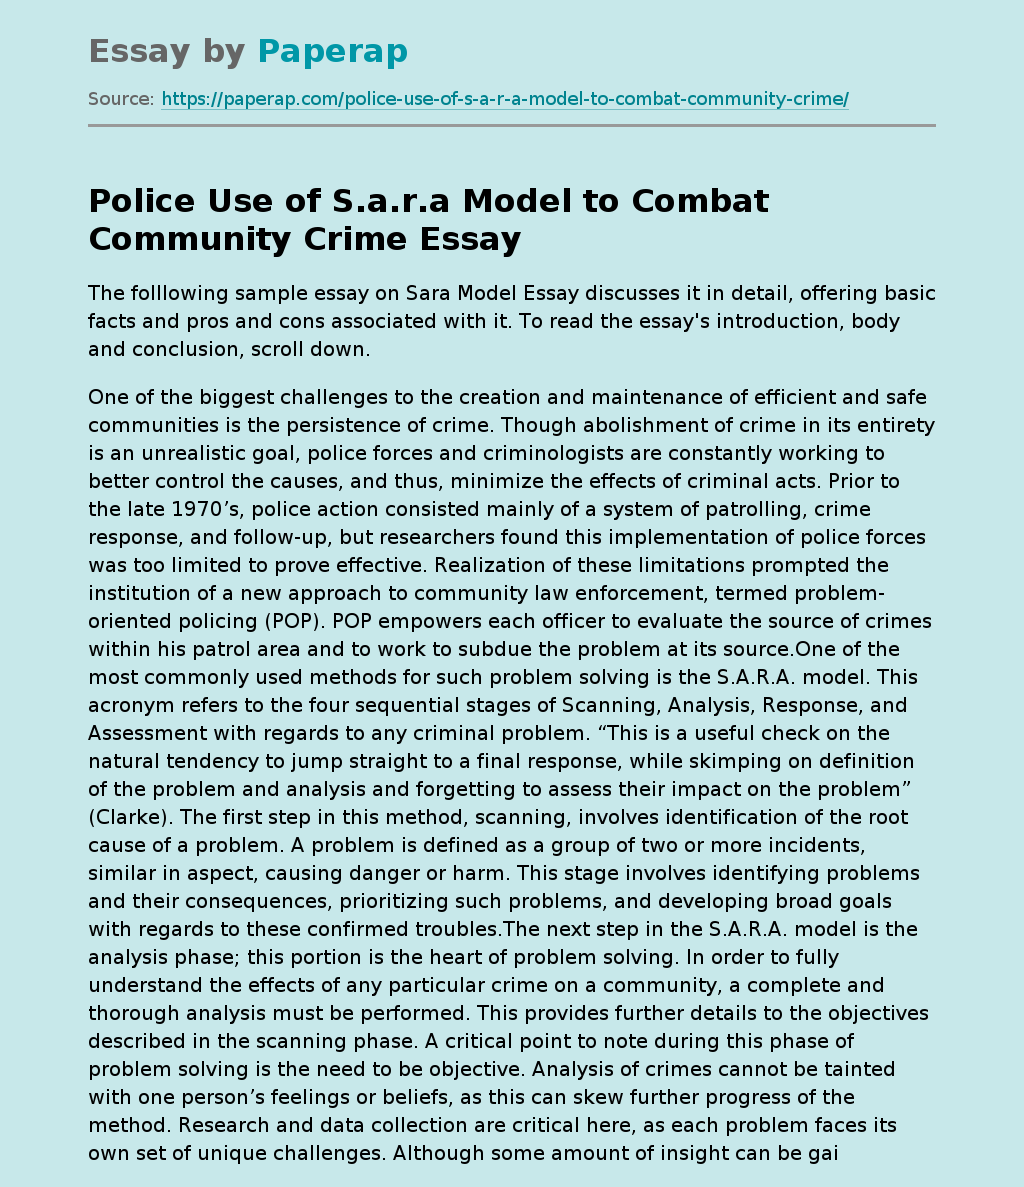 Police Use of S.a.r.a Model to Combat Community Crime